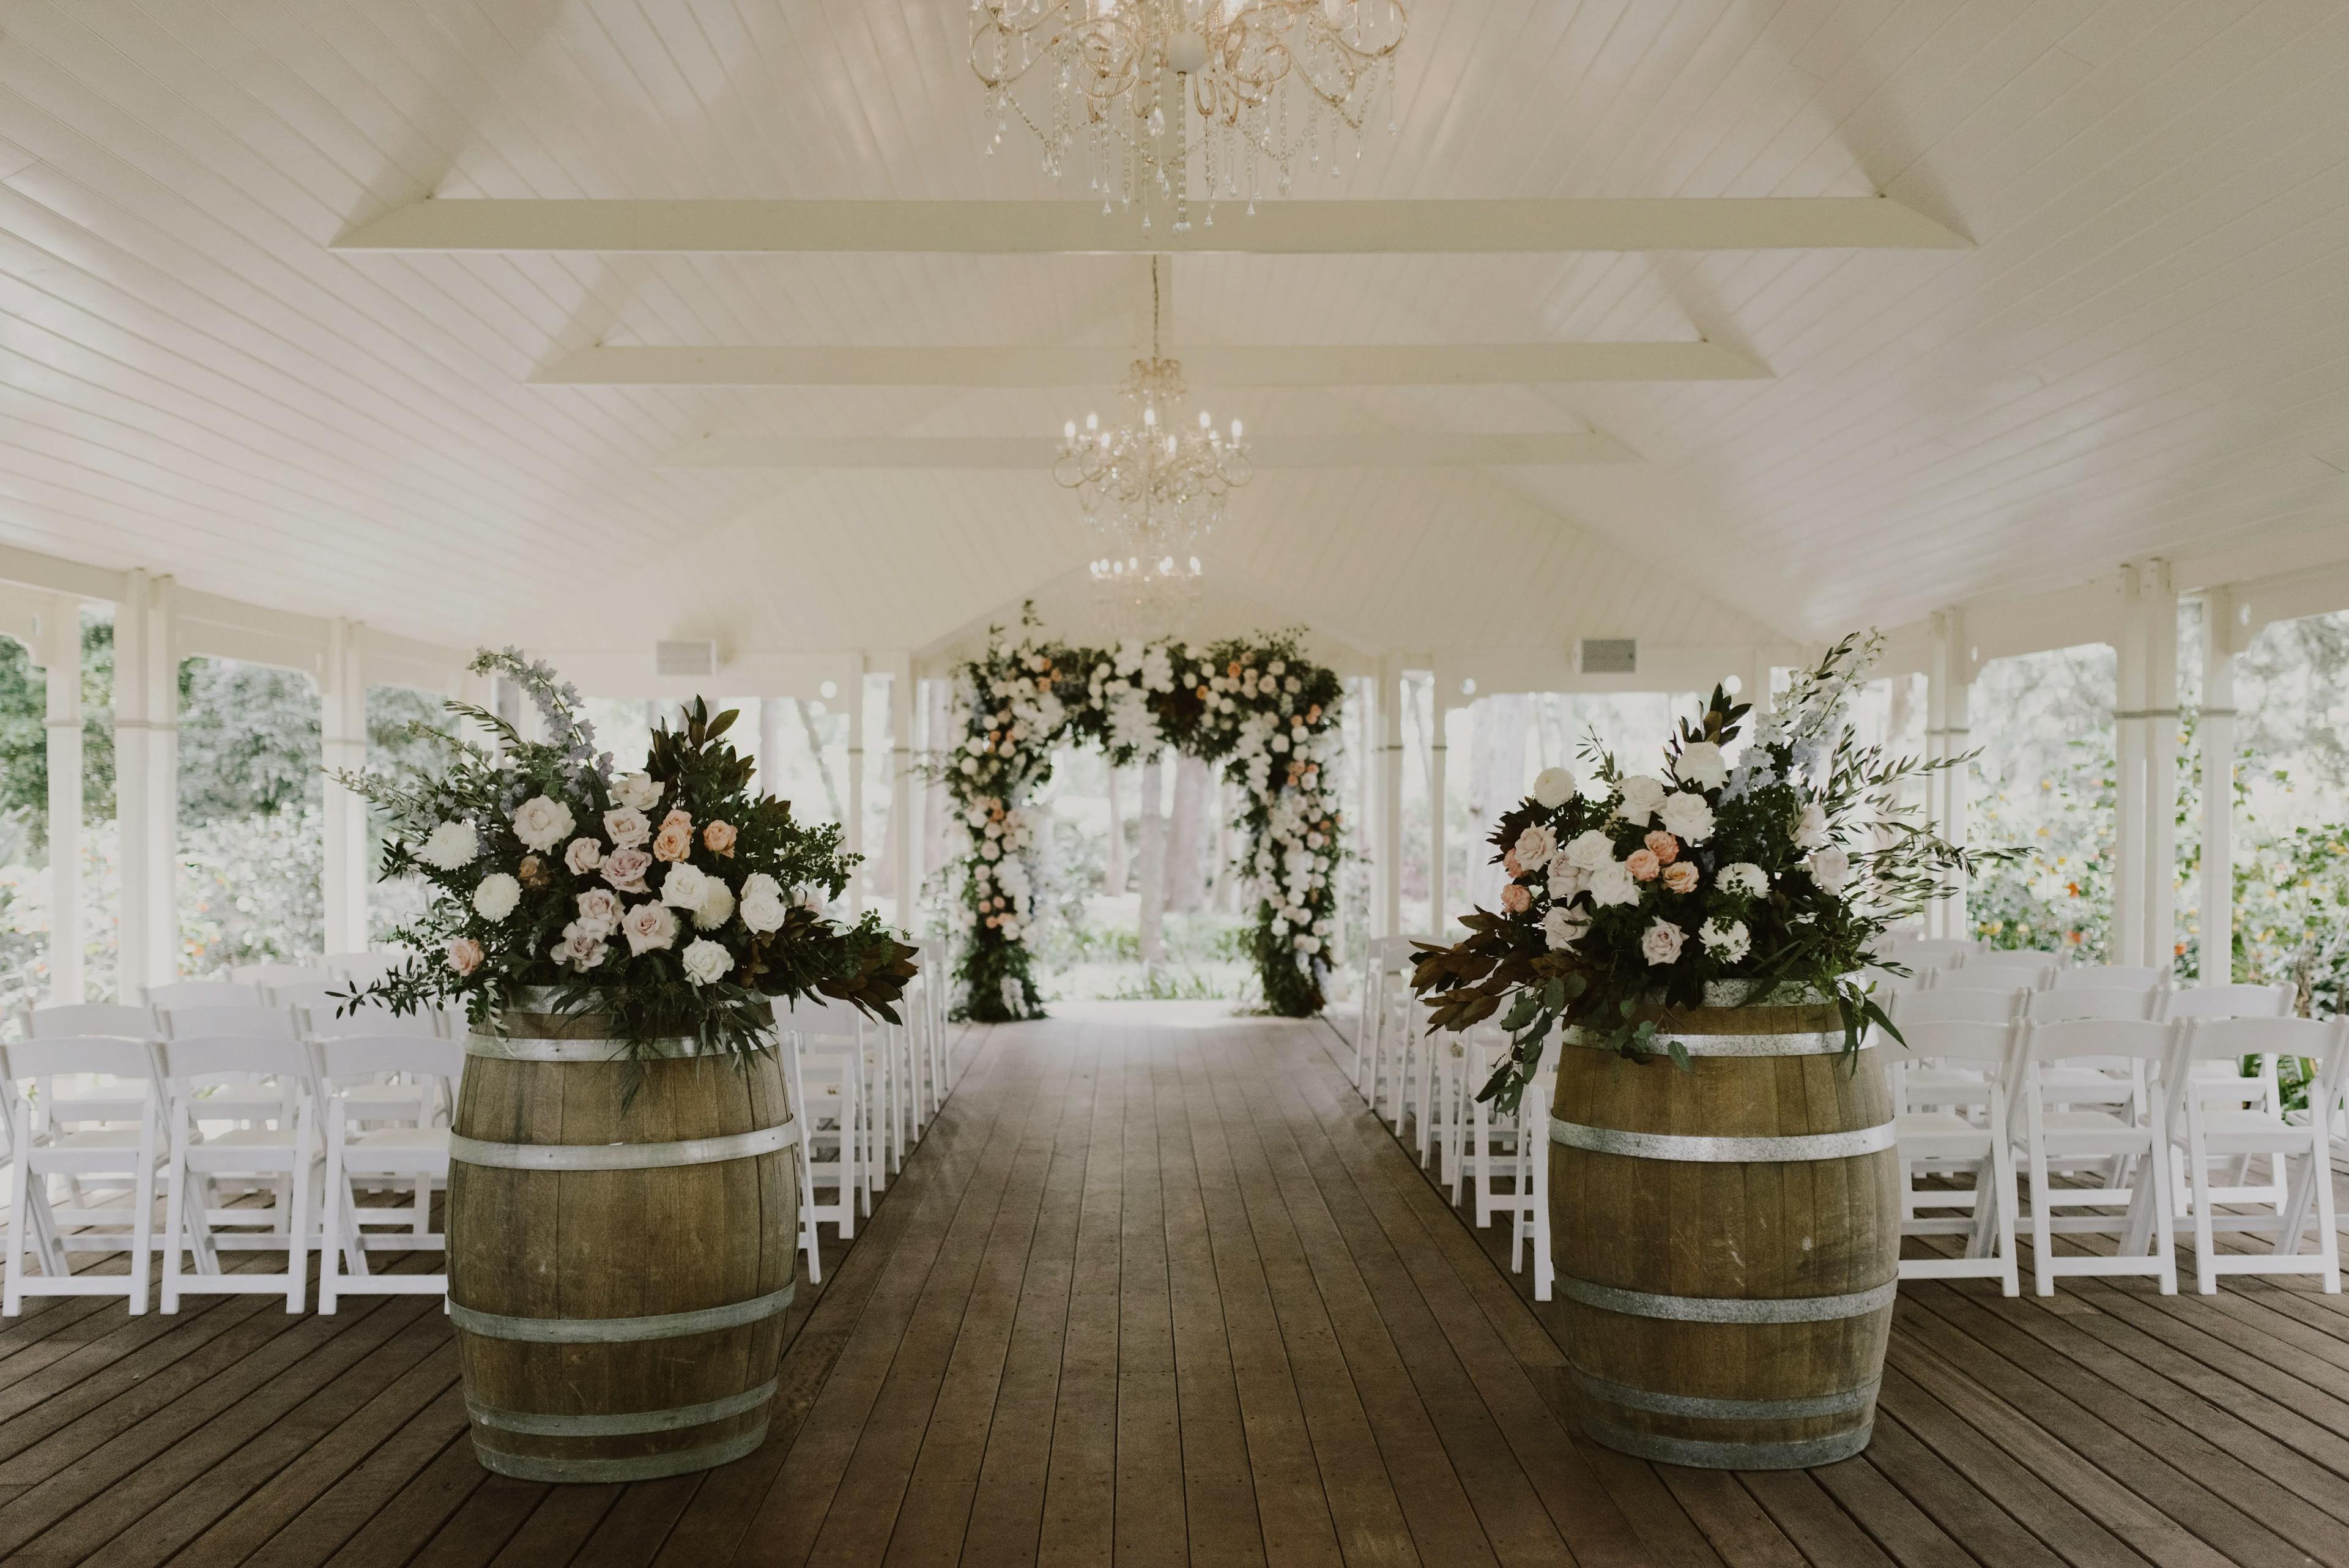 A beautifully decorated indoor wedding venue with wooden flooring and white ceilings. Two large floral arrangements sit on top of wooden barrels at the aisle's entrance, leading to a white arch adorned with flowers. White chairs are arranged on both sides of the aisle.